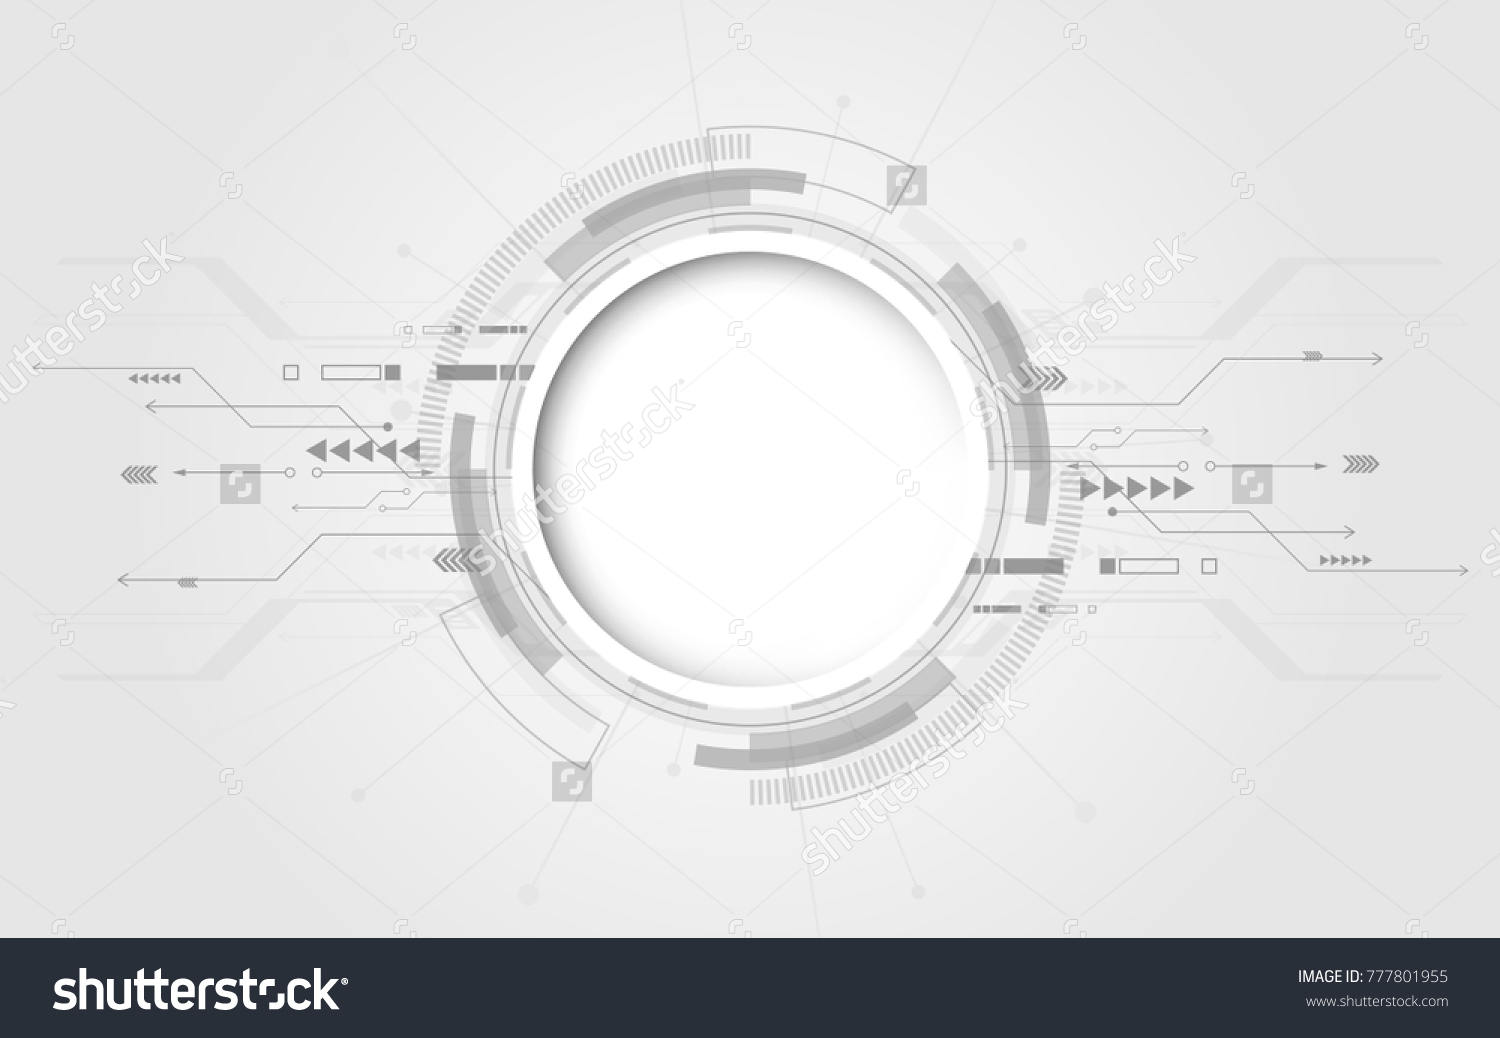 Grey white Abstract technology background with various technology elements
Hi-tech communication concept innovation background
Circle empty space for your text #777801955